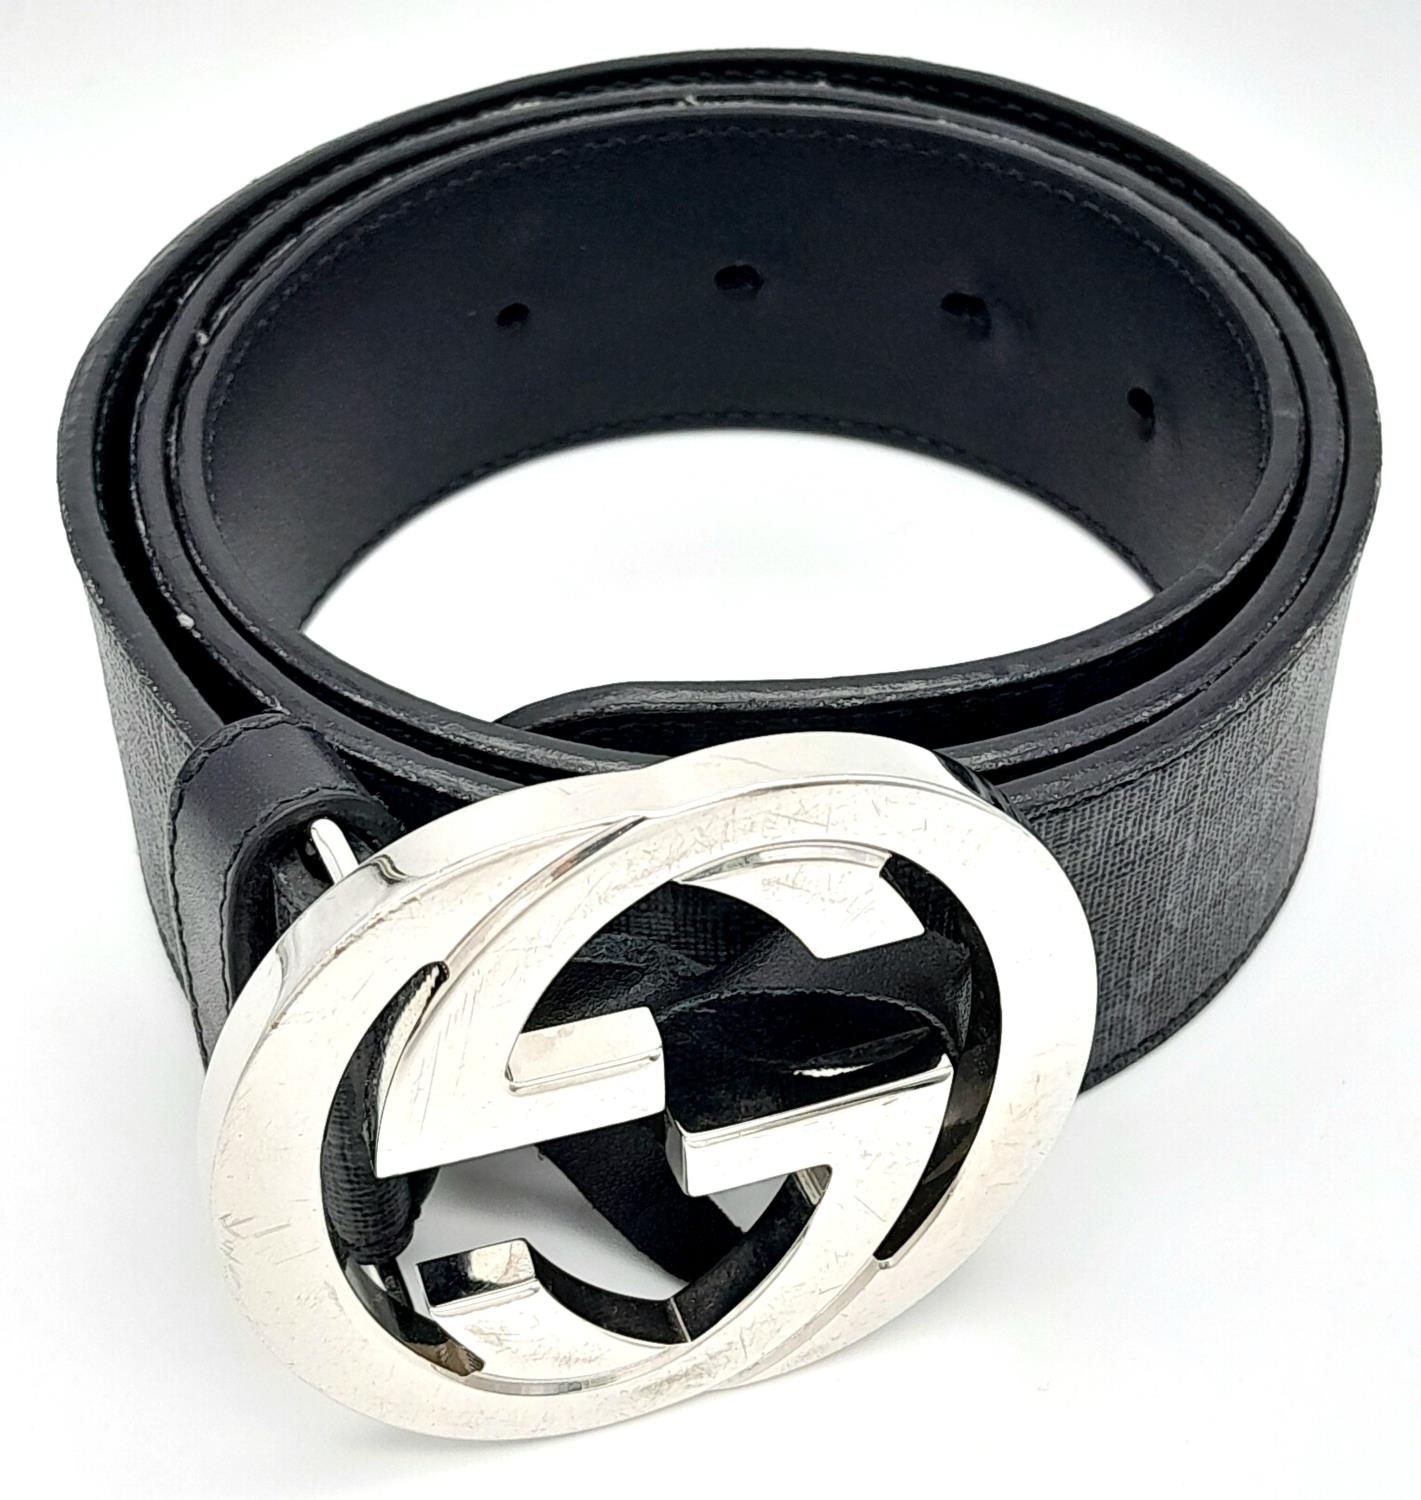 A Gucci Black with Grey Monogram Men's GG Belt. Silver-toned hardware. Approximately 104.5cm length, - Image 2 of 7